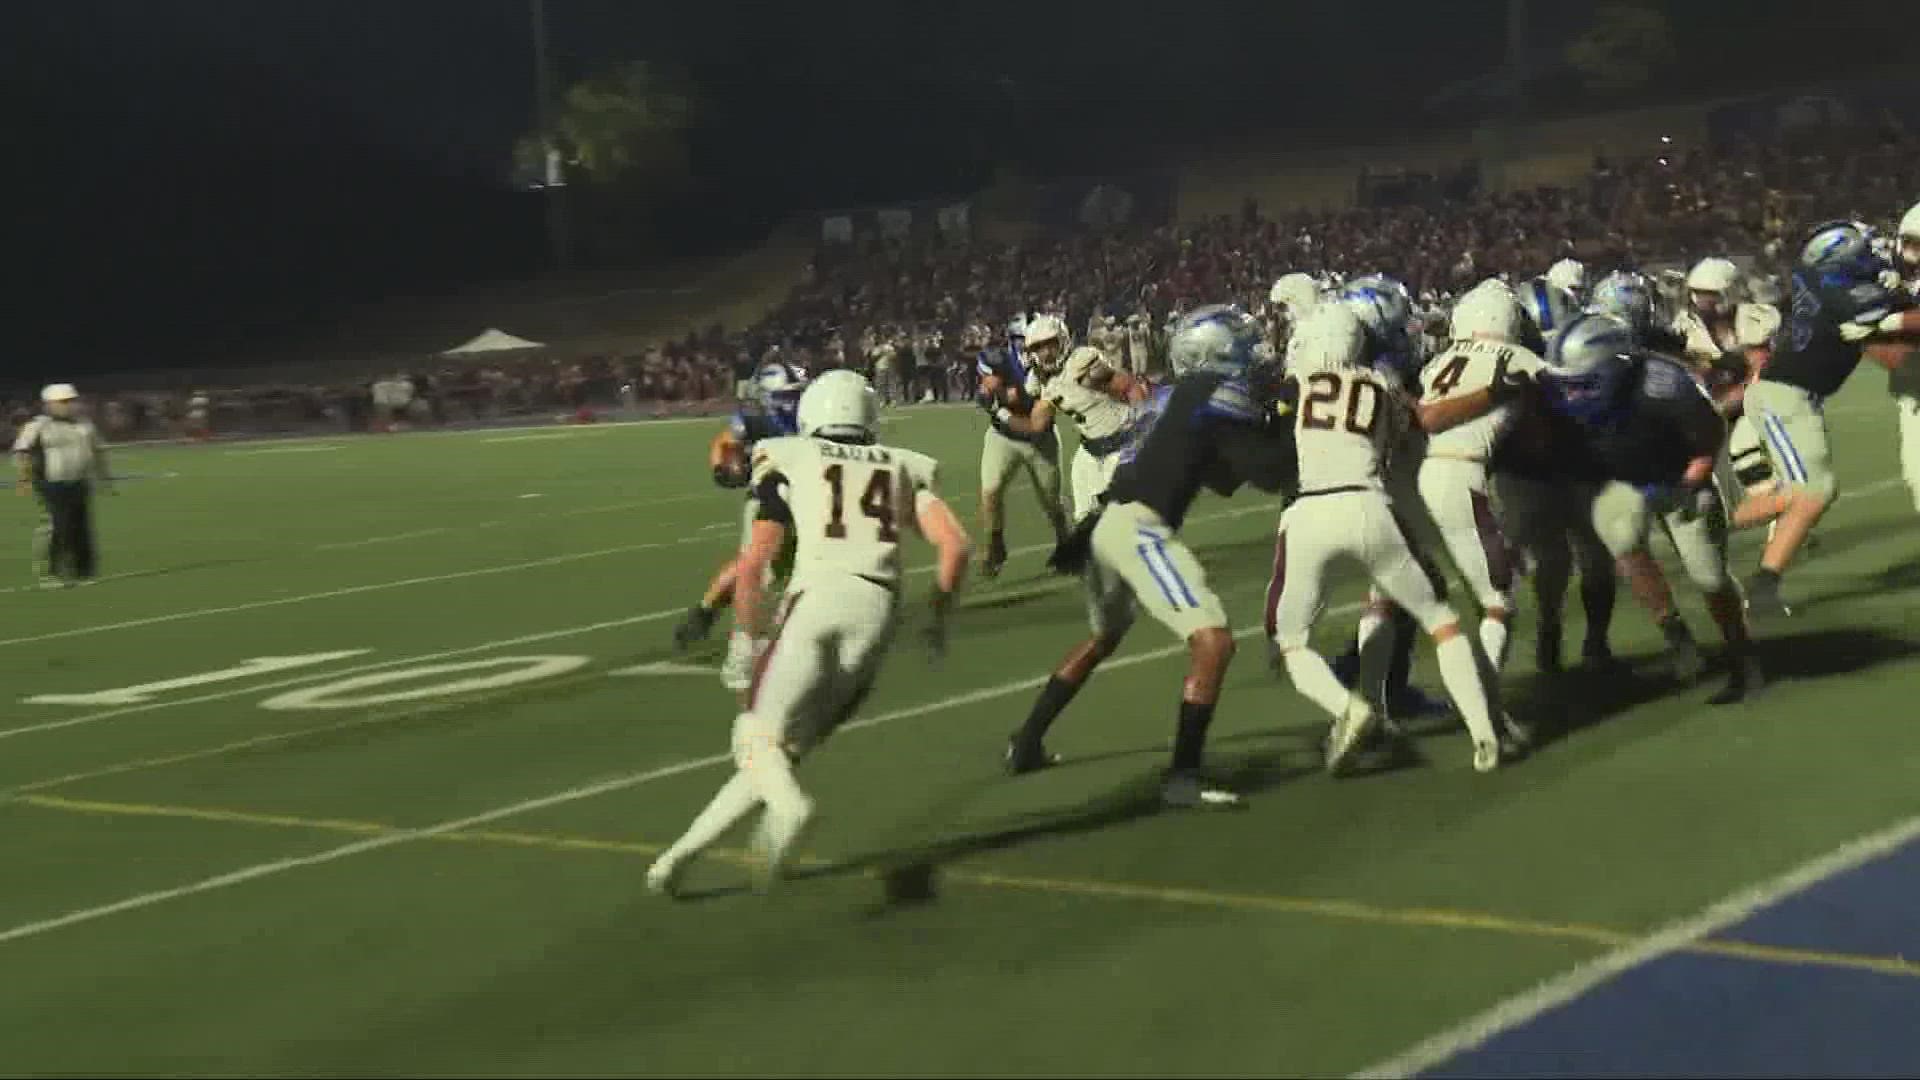 A rivalry renews as the Whitney Wildcats are set to square off against the Rocklin Thunder at the Quarry Bowl.